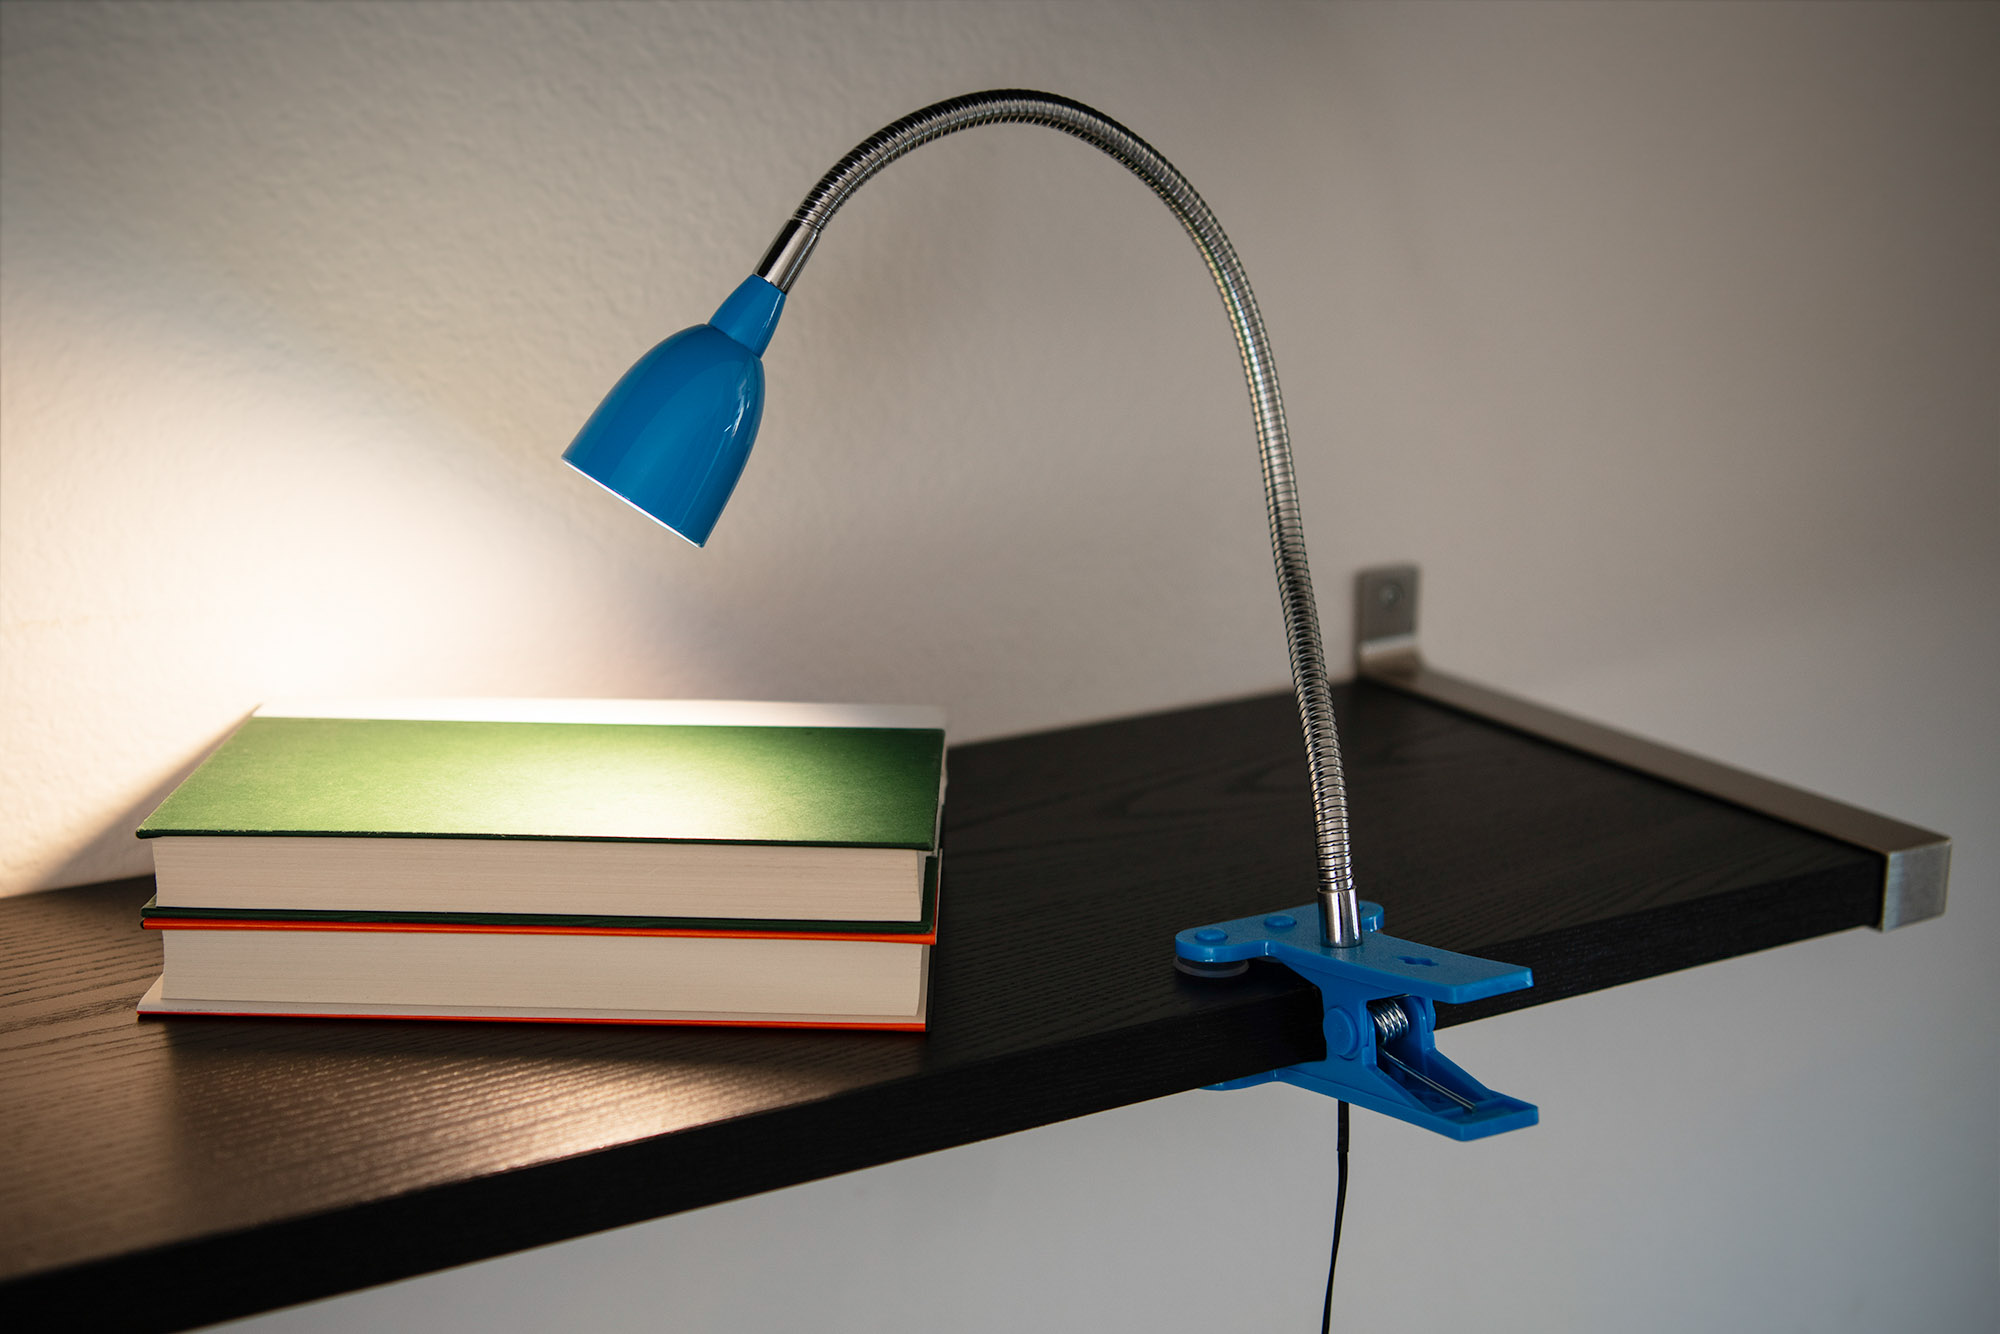 The Best Reading Lamps for Desks, Beds, and Floors - Reviews by YBD